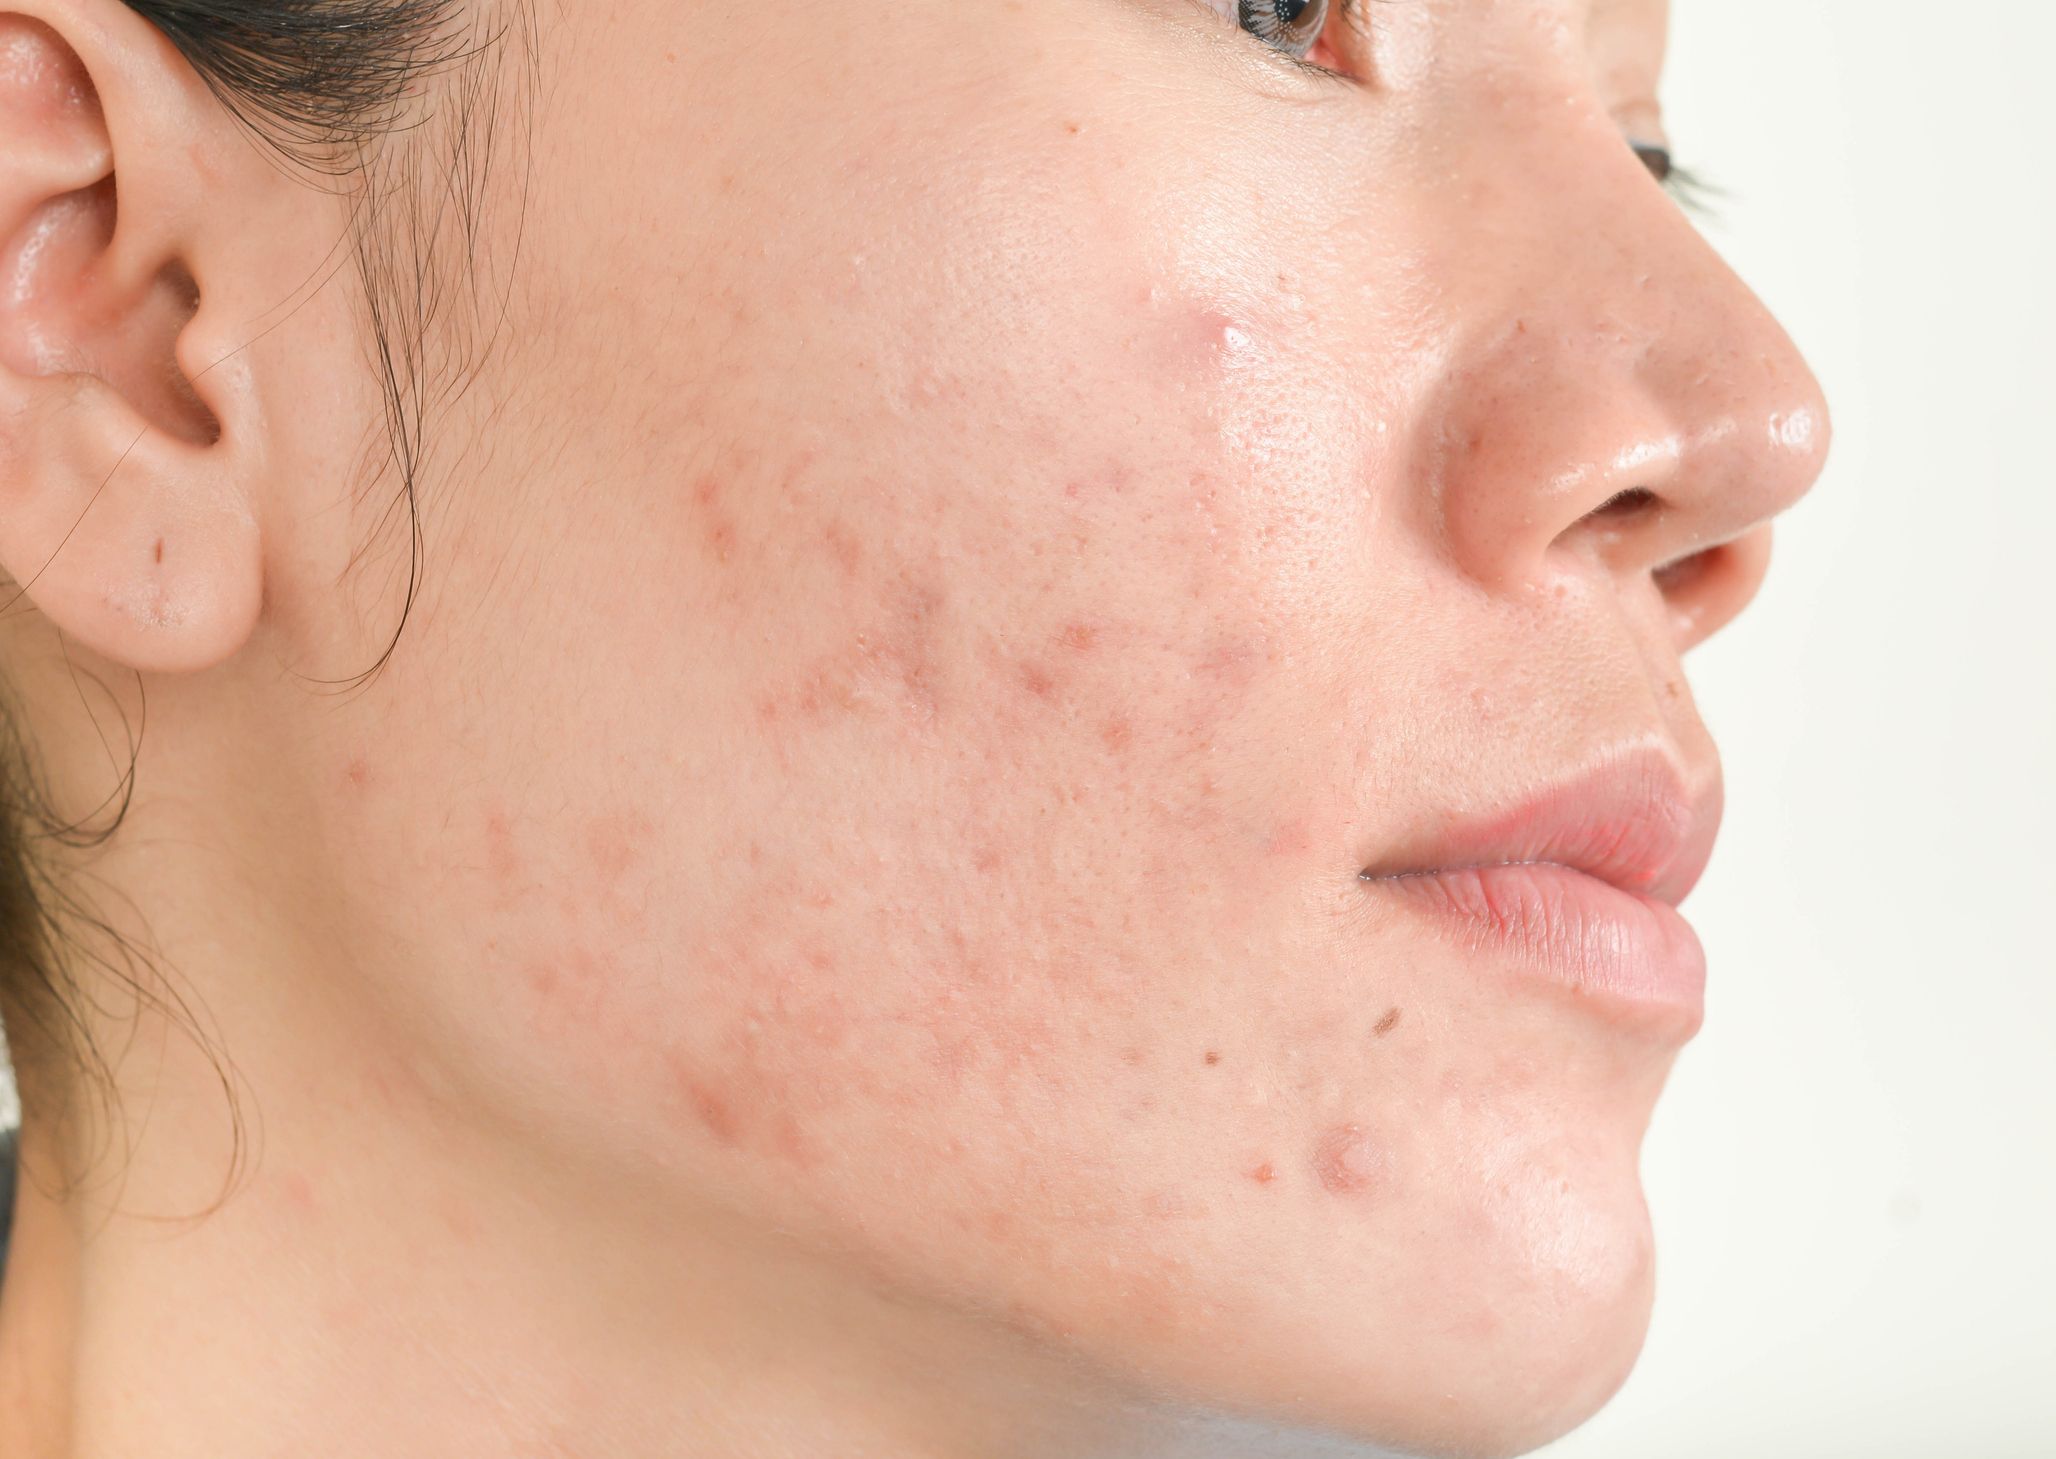 6 Adult Acne Causes And How To Get Rid Of It Say Dermatologists